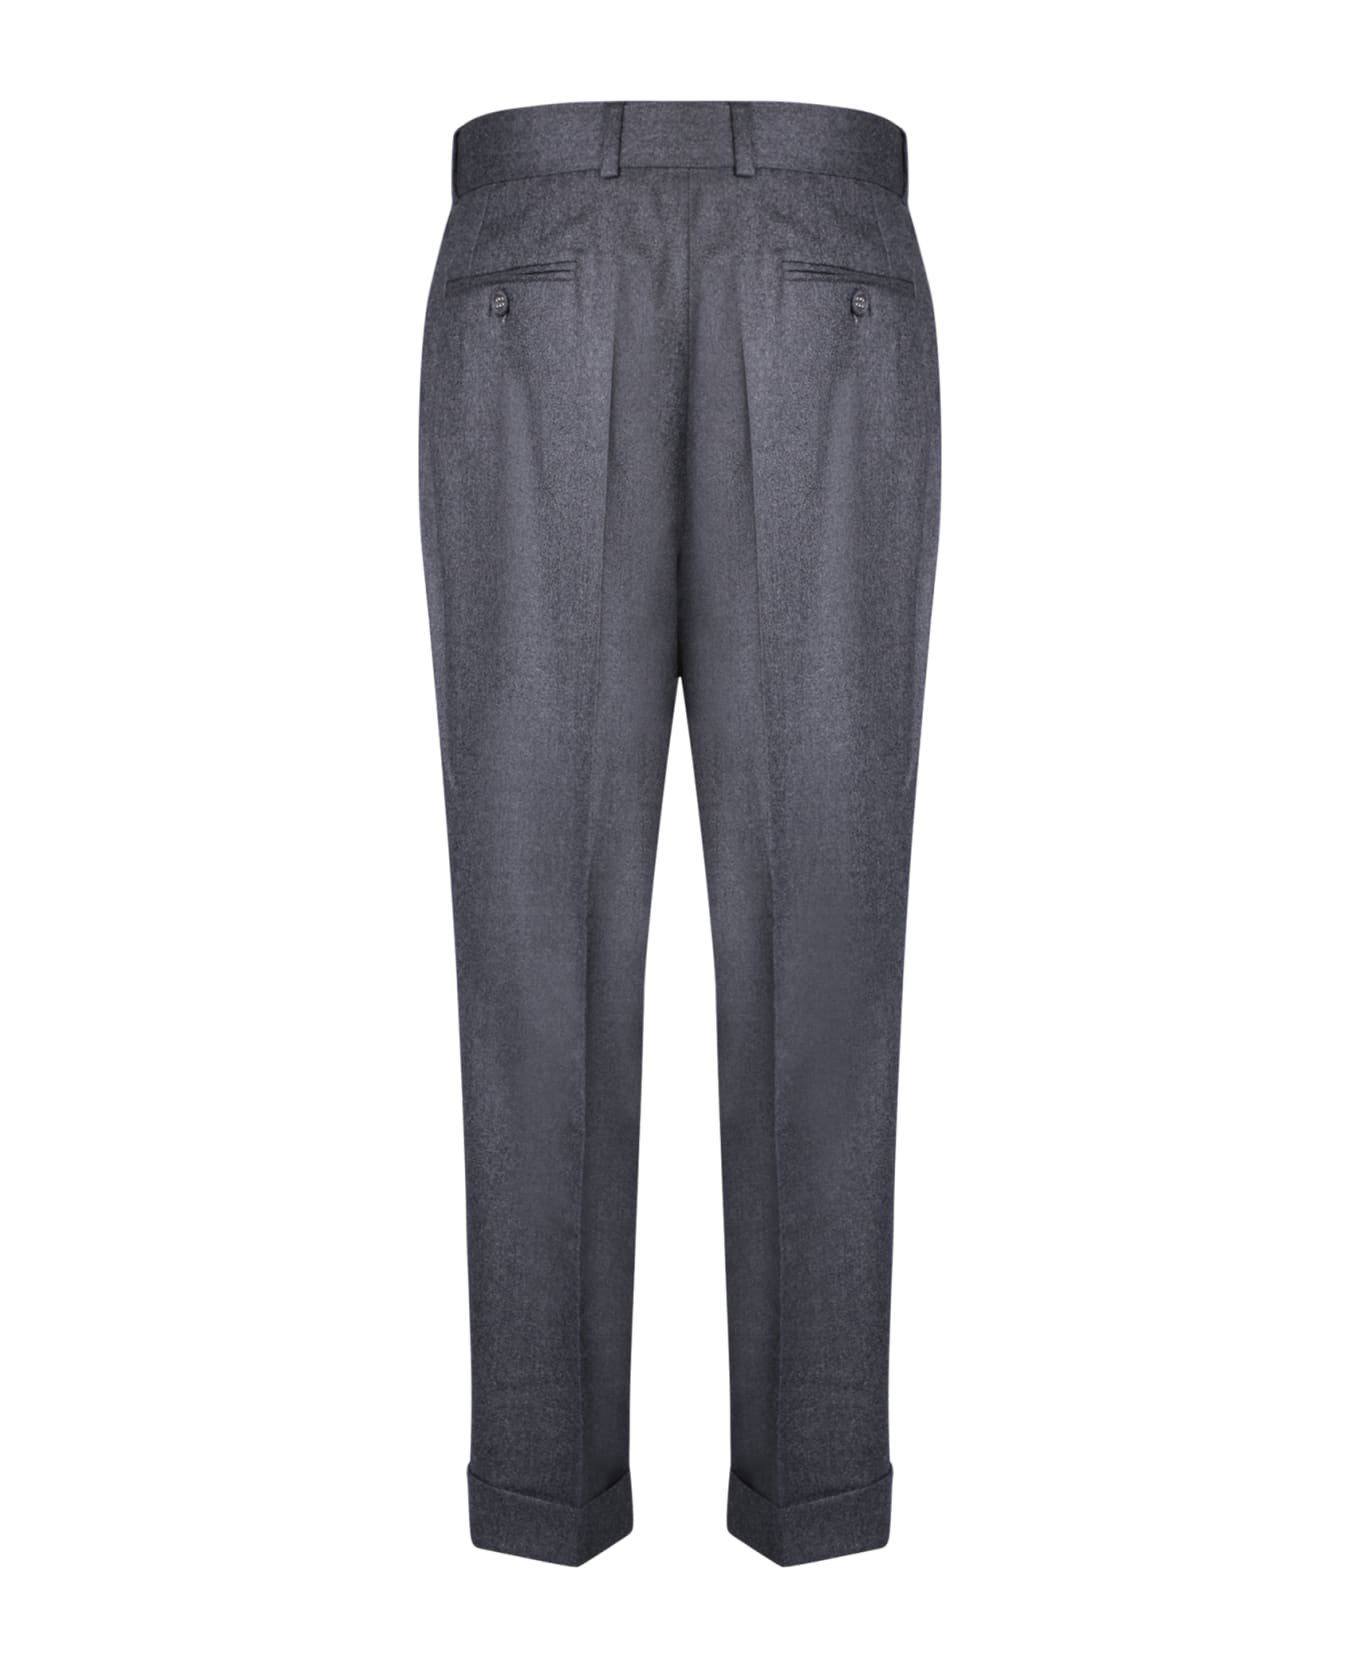 Officine Générale Pierre Grey Trousers - Grey ボトムス